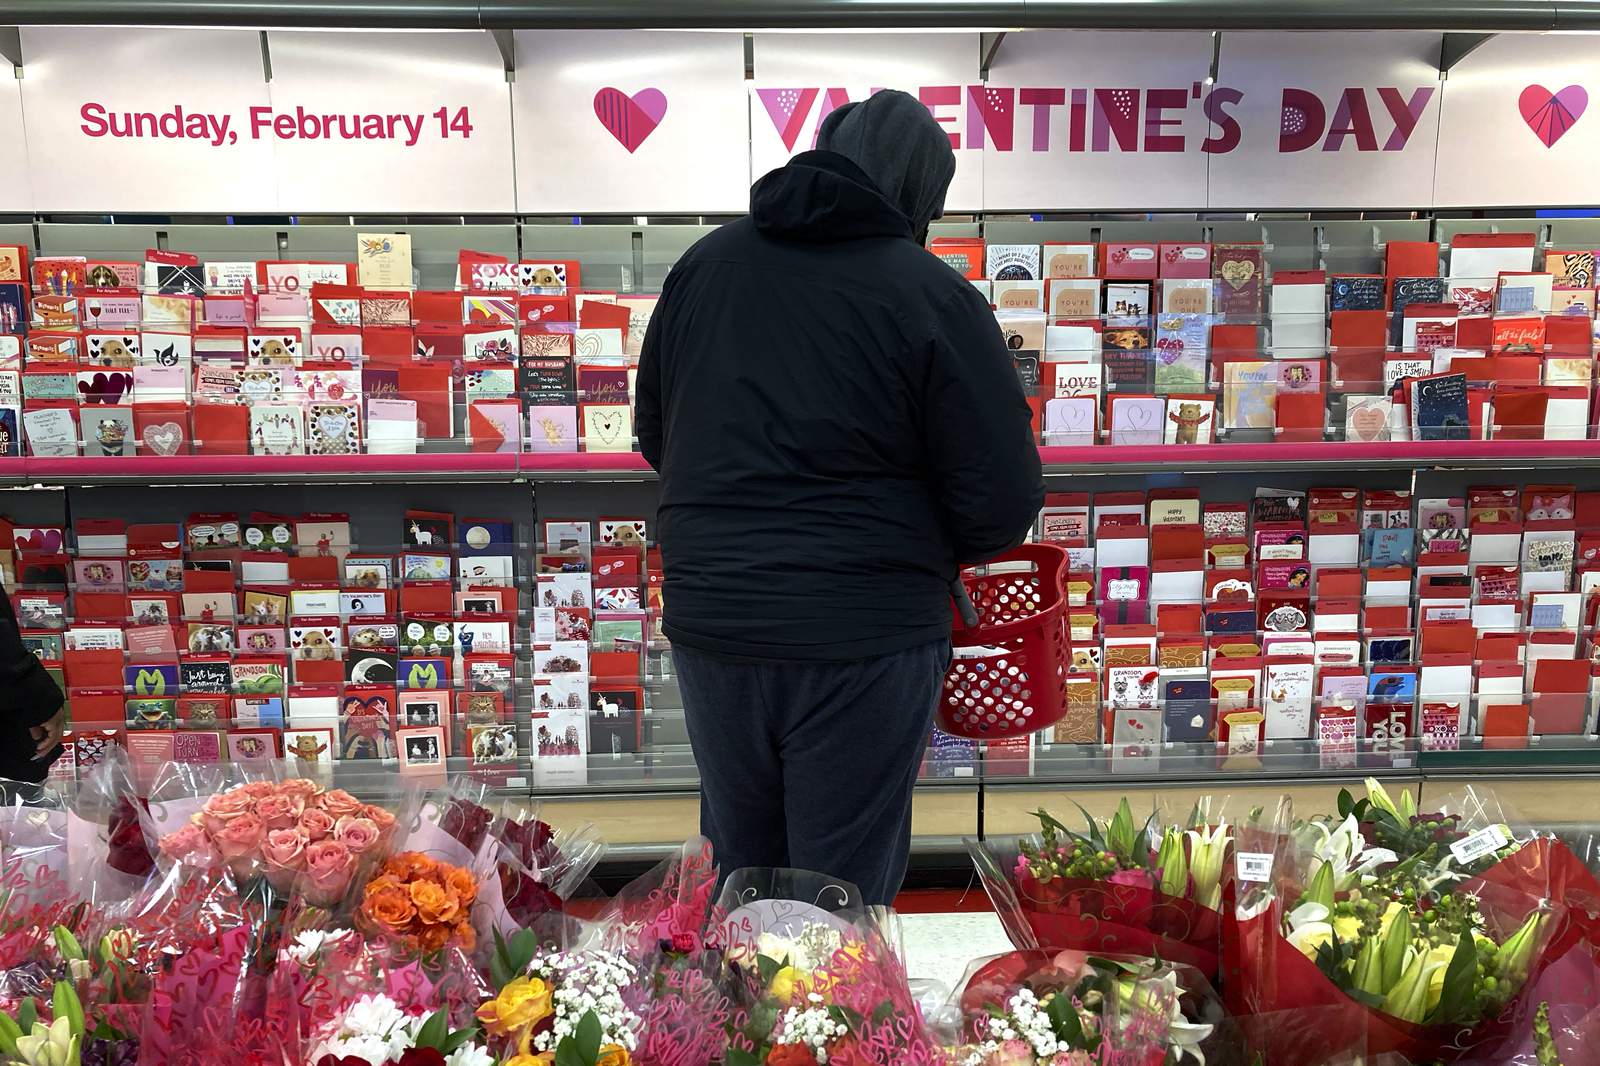 A bleak Valentine’s Day, lovers find hope in roses, vaccines